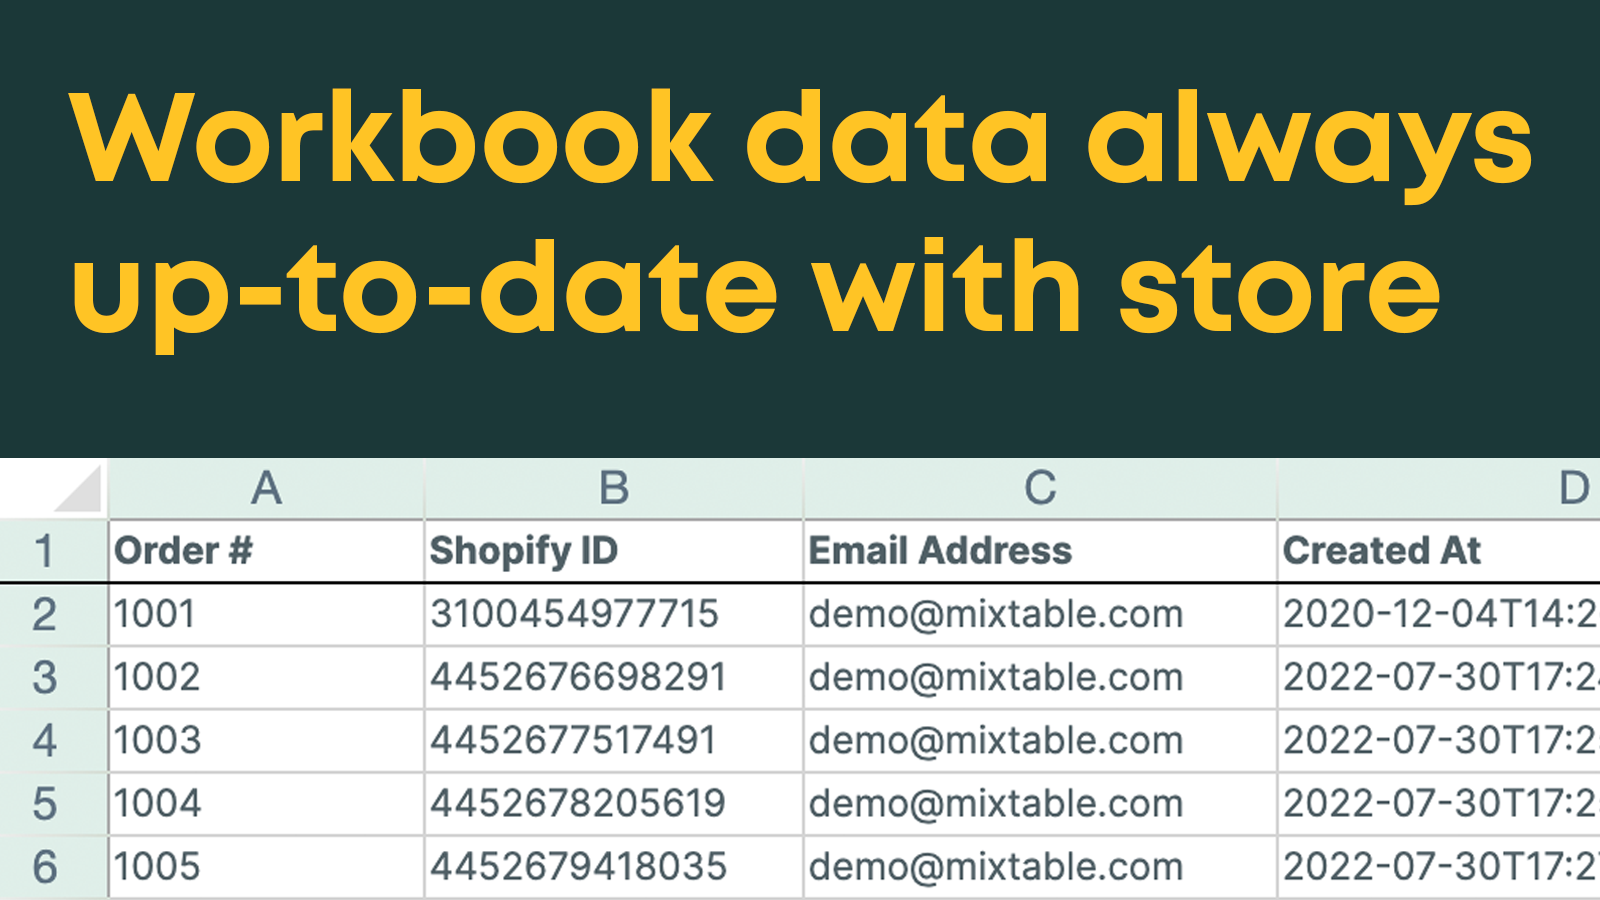 Workbook always in sync with store data